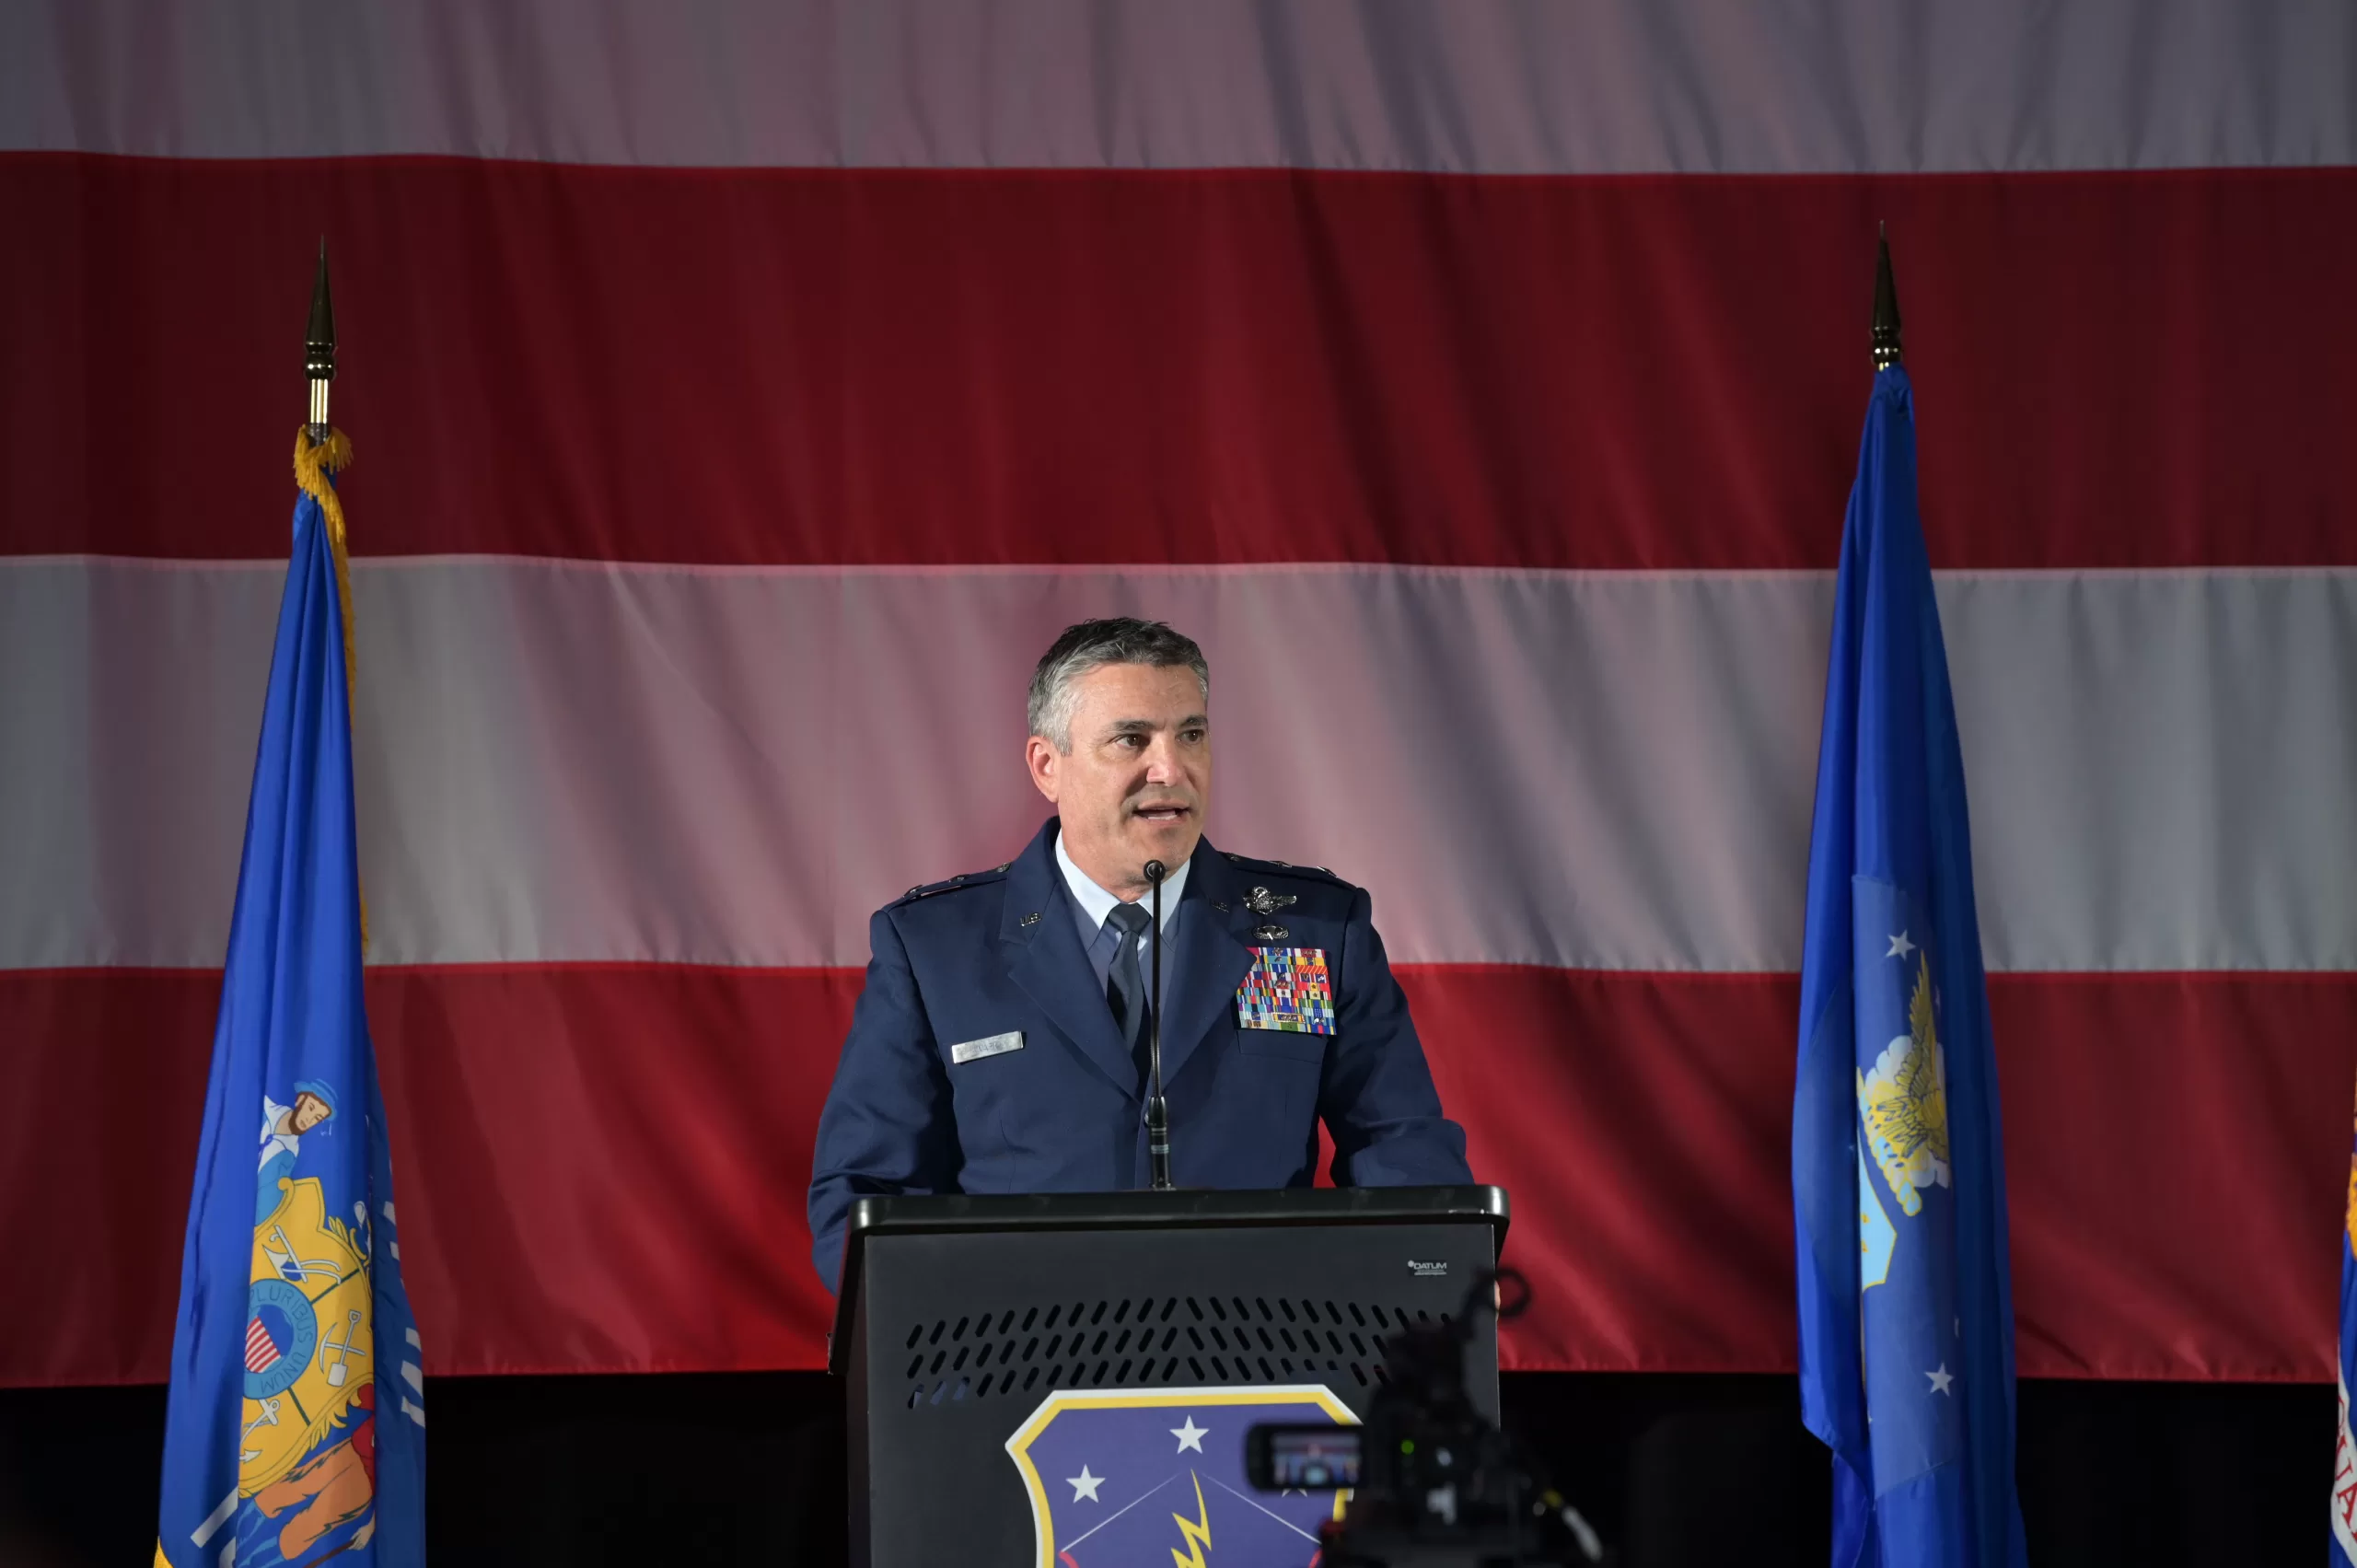 Maj. Gen. Paul Knapp, Wisconsin’s adjutant general, speaks during a Sept. 7 ceremony at the Wisconsin Air National Guard’s 115th Fighter Wing in Madison, Wis., to commemorate the fighter wing formally accepting the F-35 Lightning II mission. The 115th is only the second Air National Guard to field the 5th-generation fighter jet. 115th Fighter Wing photo by Tech. Sgt. Cameron Lewis